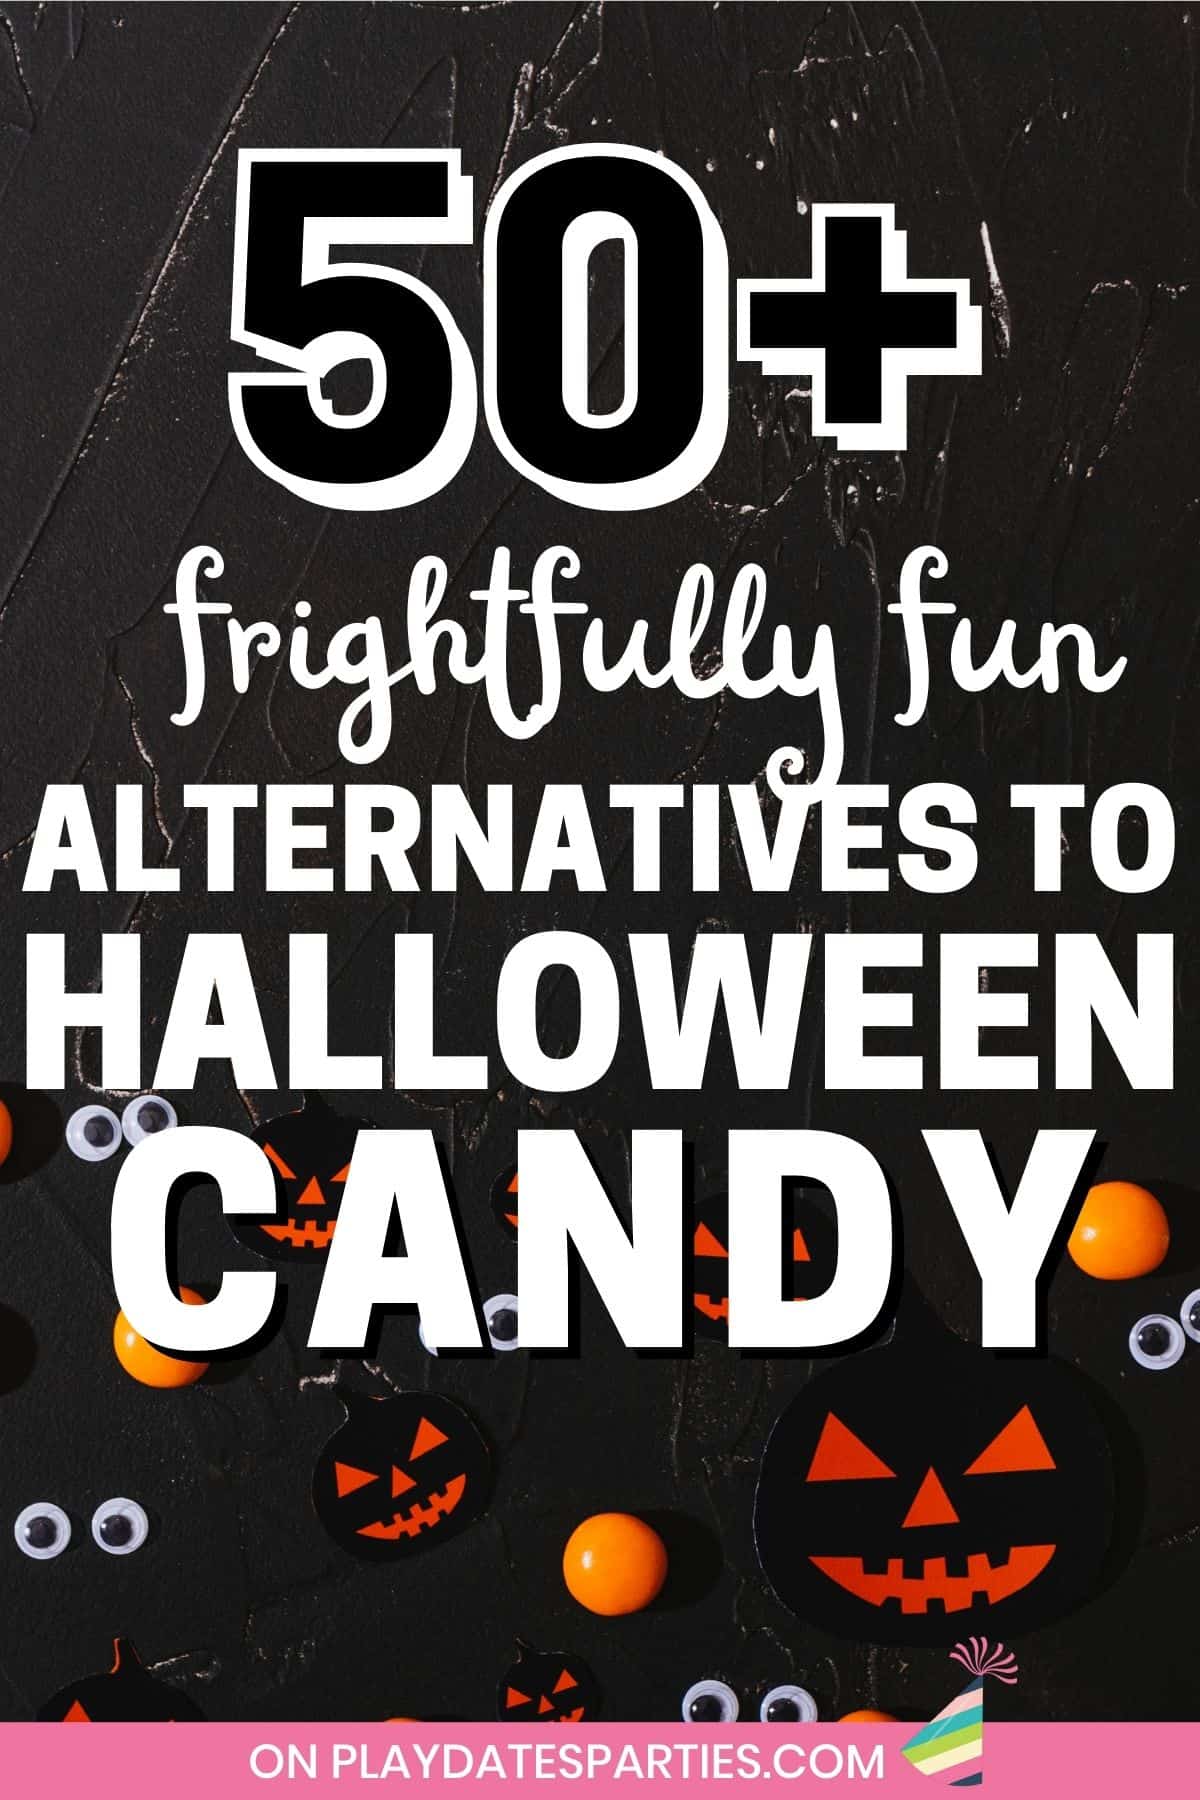 Black photo with creepy eyes and a text overly 50+ frightfully fun alternatives to Halloween Candy.